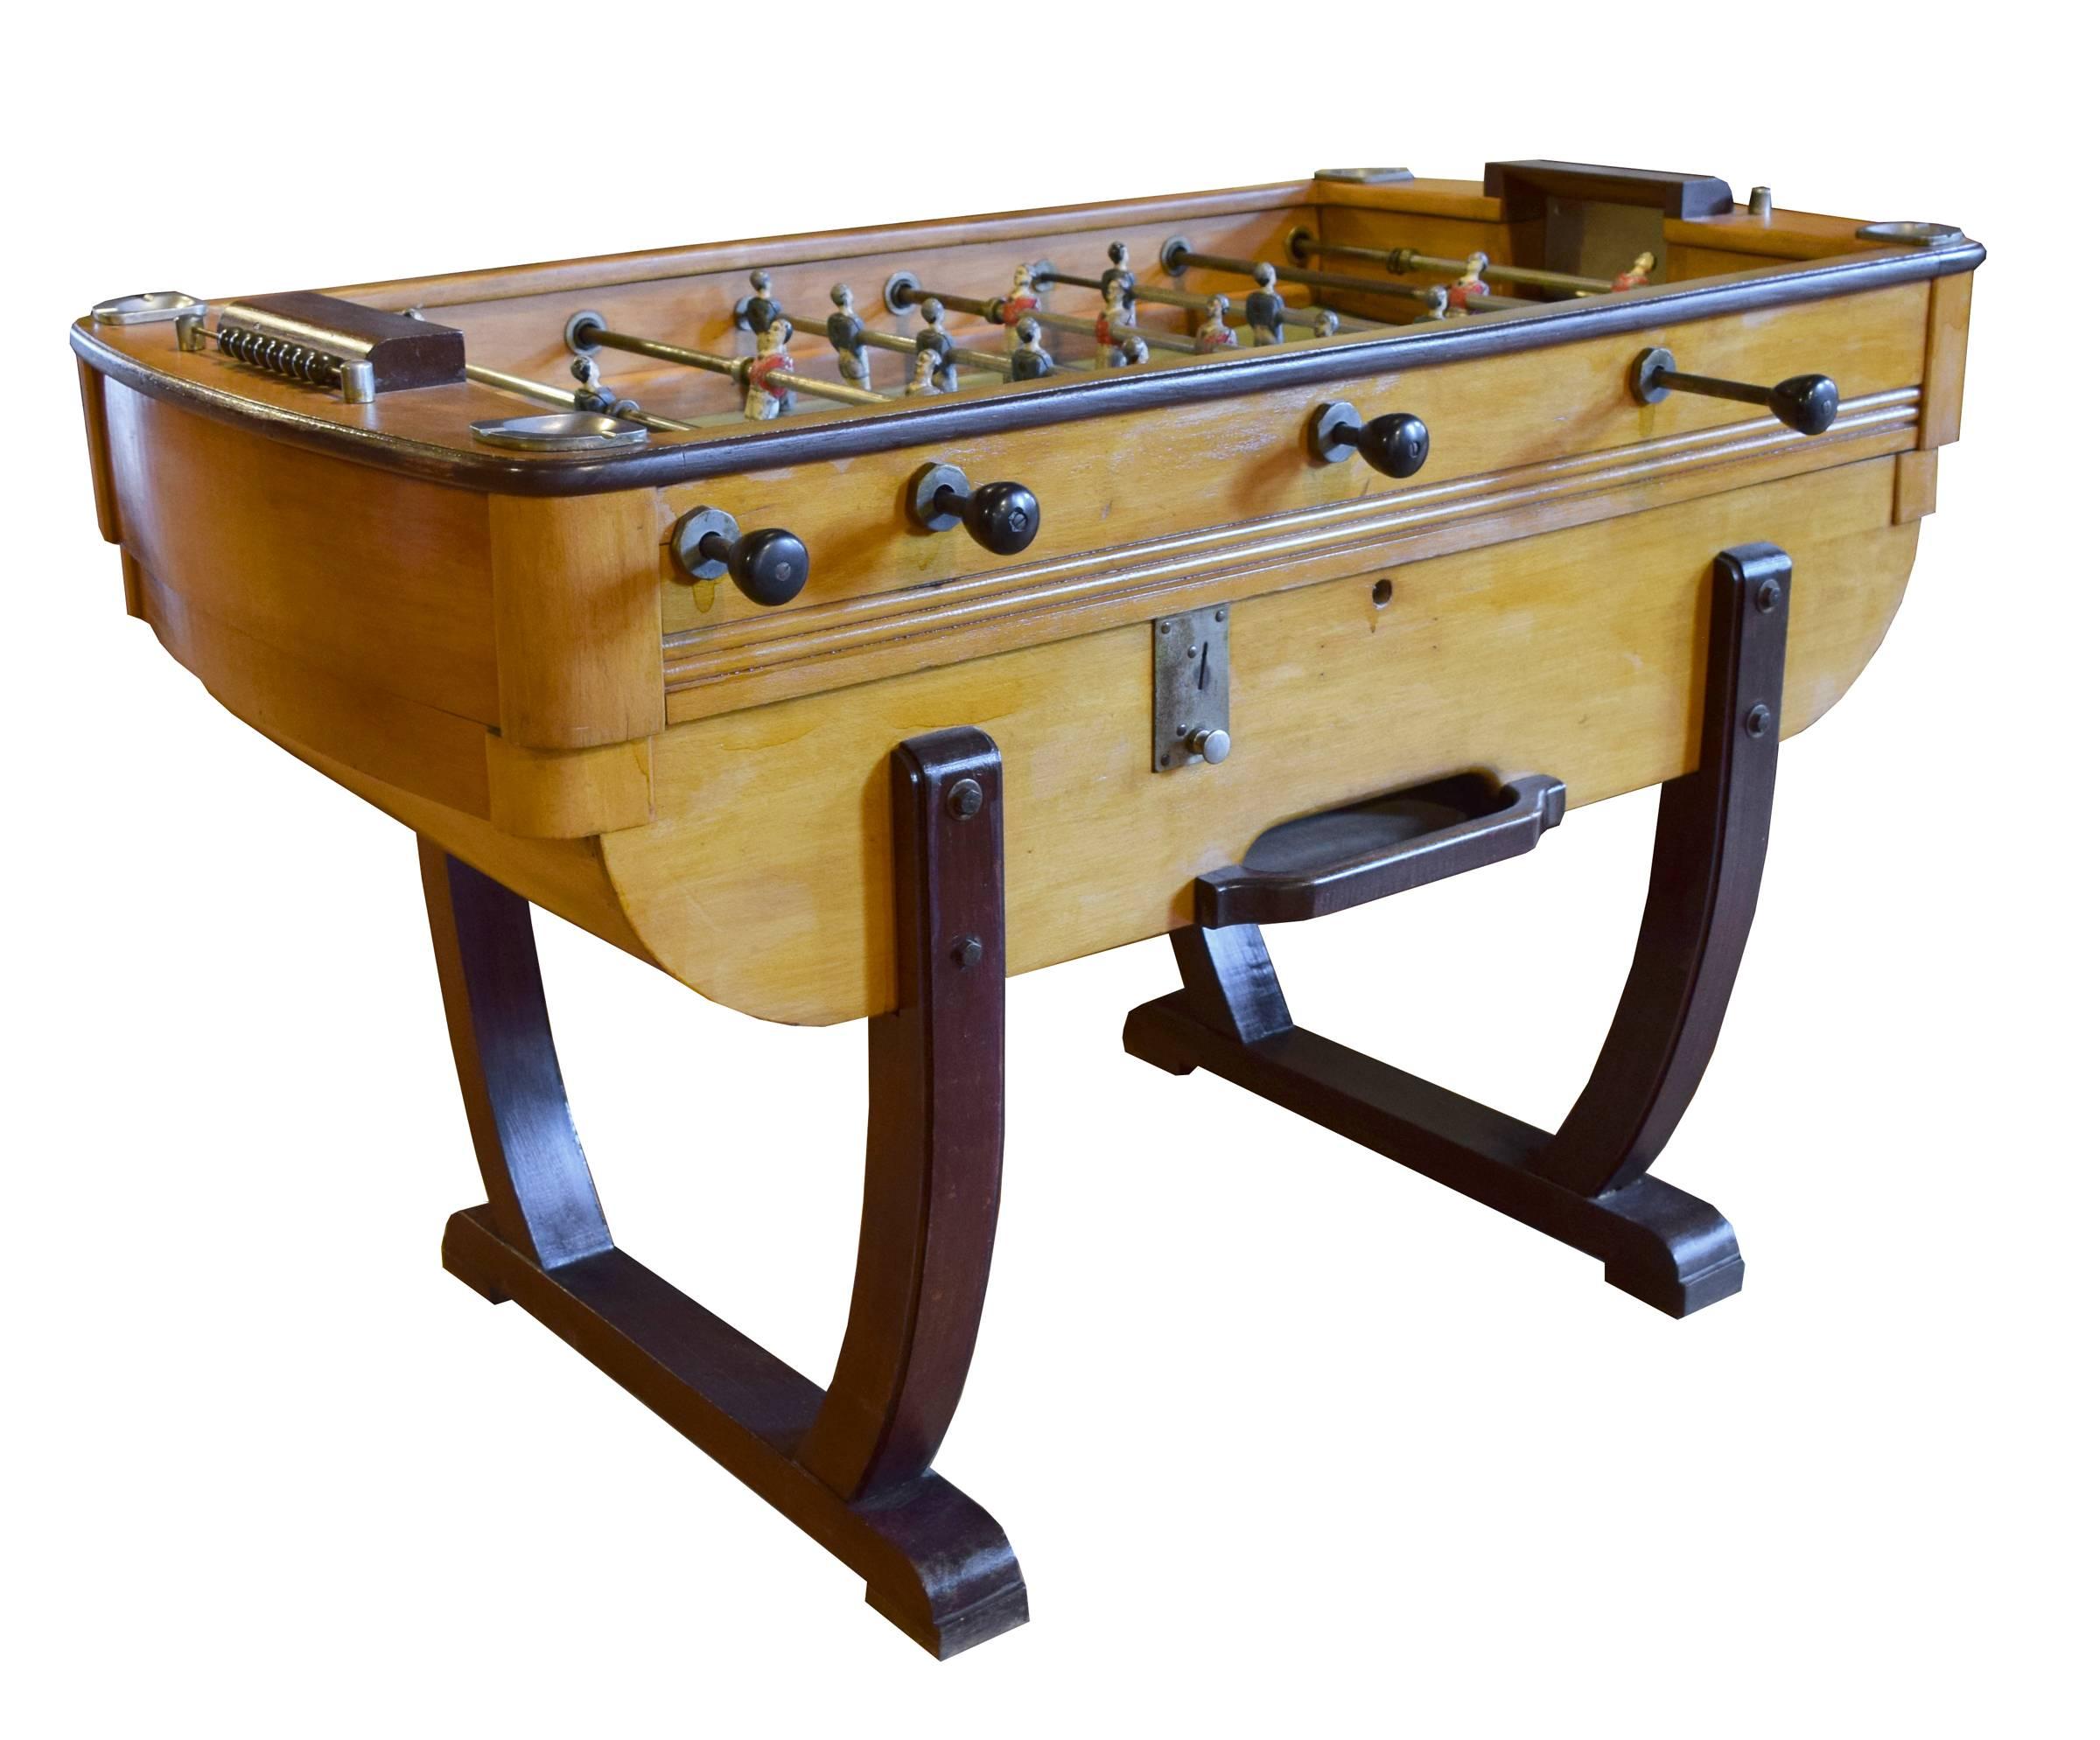 An Italian foosball table, circa 1930. The coin operated table features painted blue and red metal players on metal rods. The table also boasts dual manual scoring systems and four ashtrays.